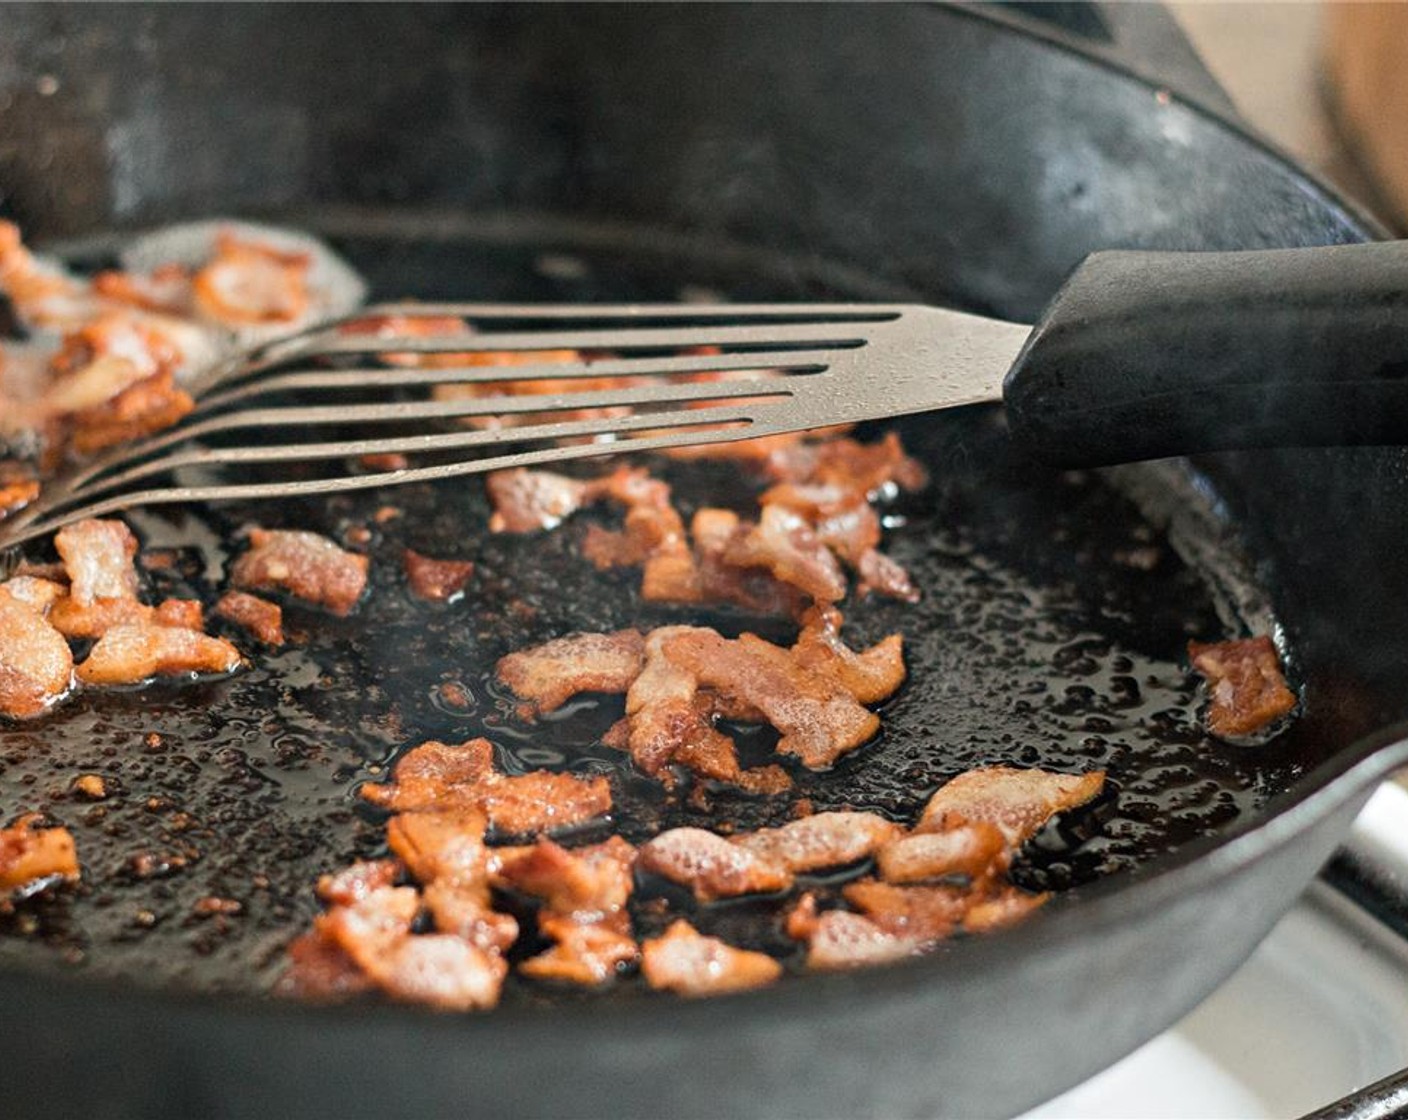 step 6 In a large skillet over medium heat, render the fat from the bacon until it becomes crispy. Remove the bacon with a slotted spoon to drain on paper towels.